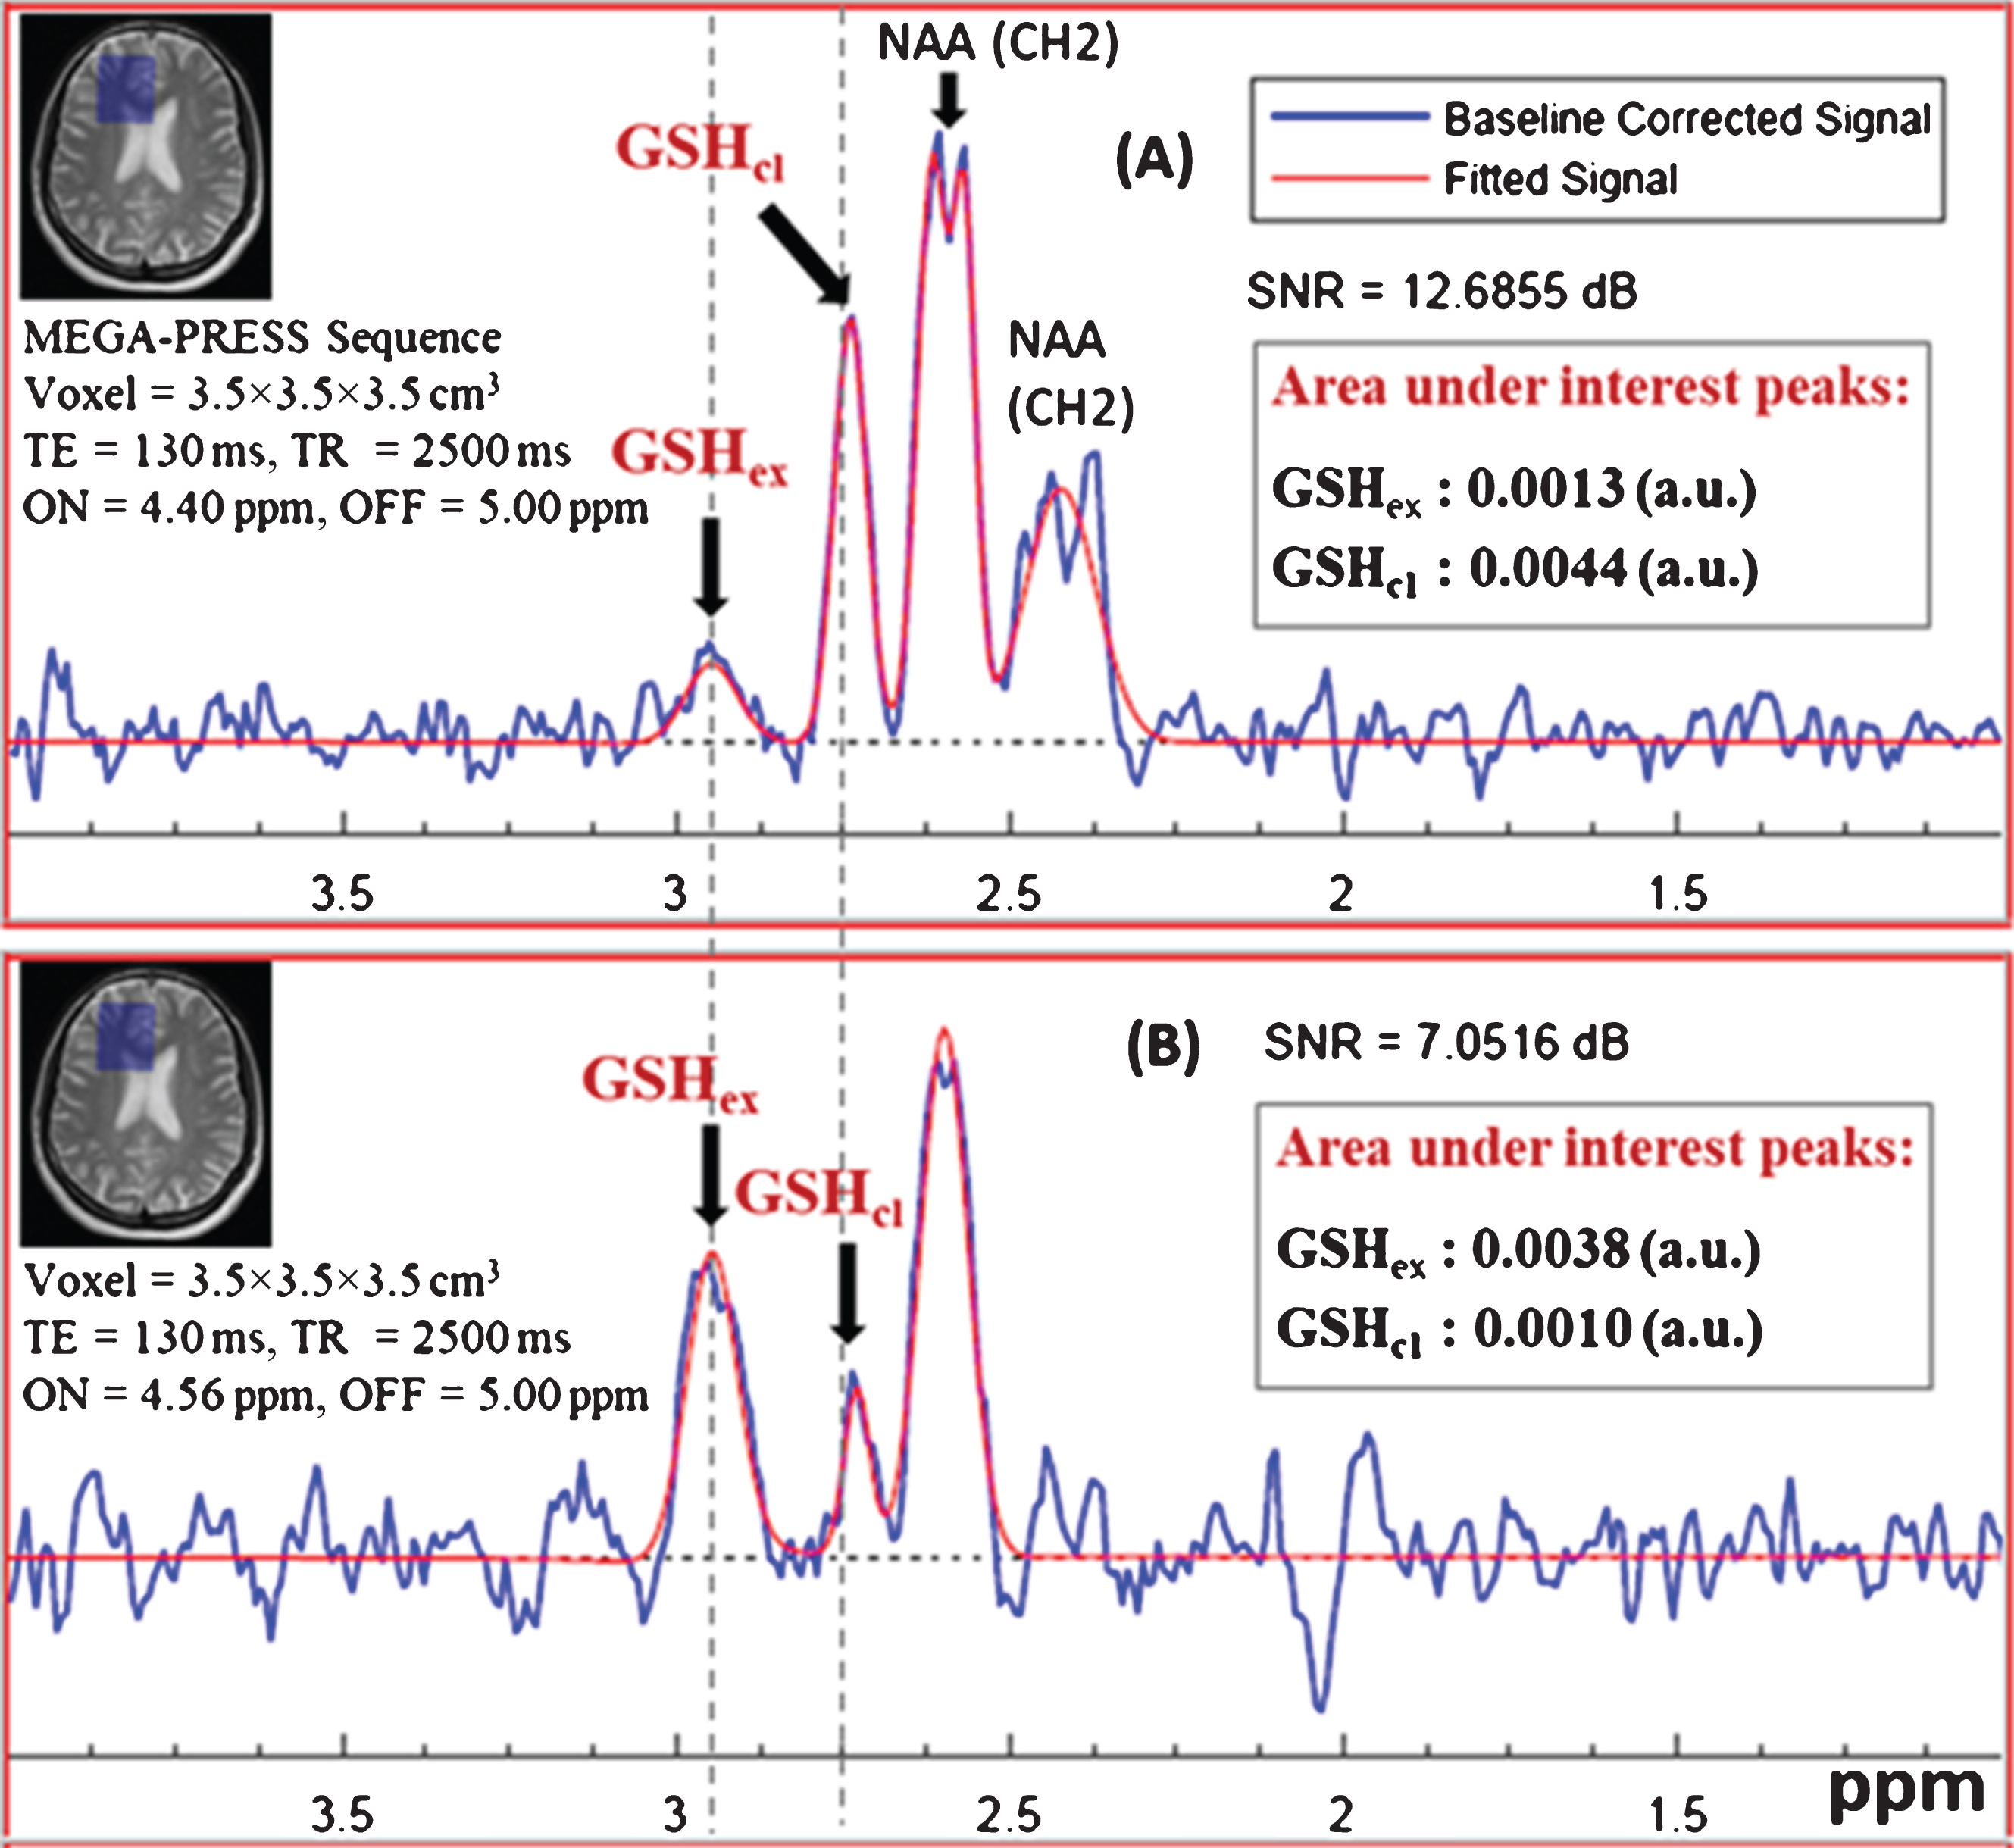 Detection of the two (extended and closed) in vivo GSH conformer peaks (GSHex and GSHcl) in healthy control subject using MEGA-PRESS experiment. Data was collected using 3T Philips scanner at NBRC. Data acquisition was performed with following parameters: TE = 130 ms, TR = 2500 ms, (A) MEGA-ON/OFF = 4.40 ppm/5.00 ppm and, (B) MEGA-ON/OFF = 4.56 ppm/5.00 ppm) (voxel size = 3.5×3.5×3.5 cm3 on right frontal cortex).